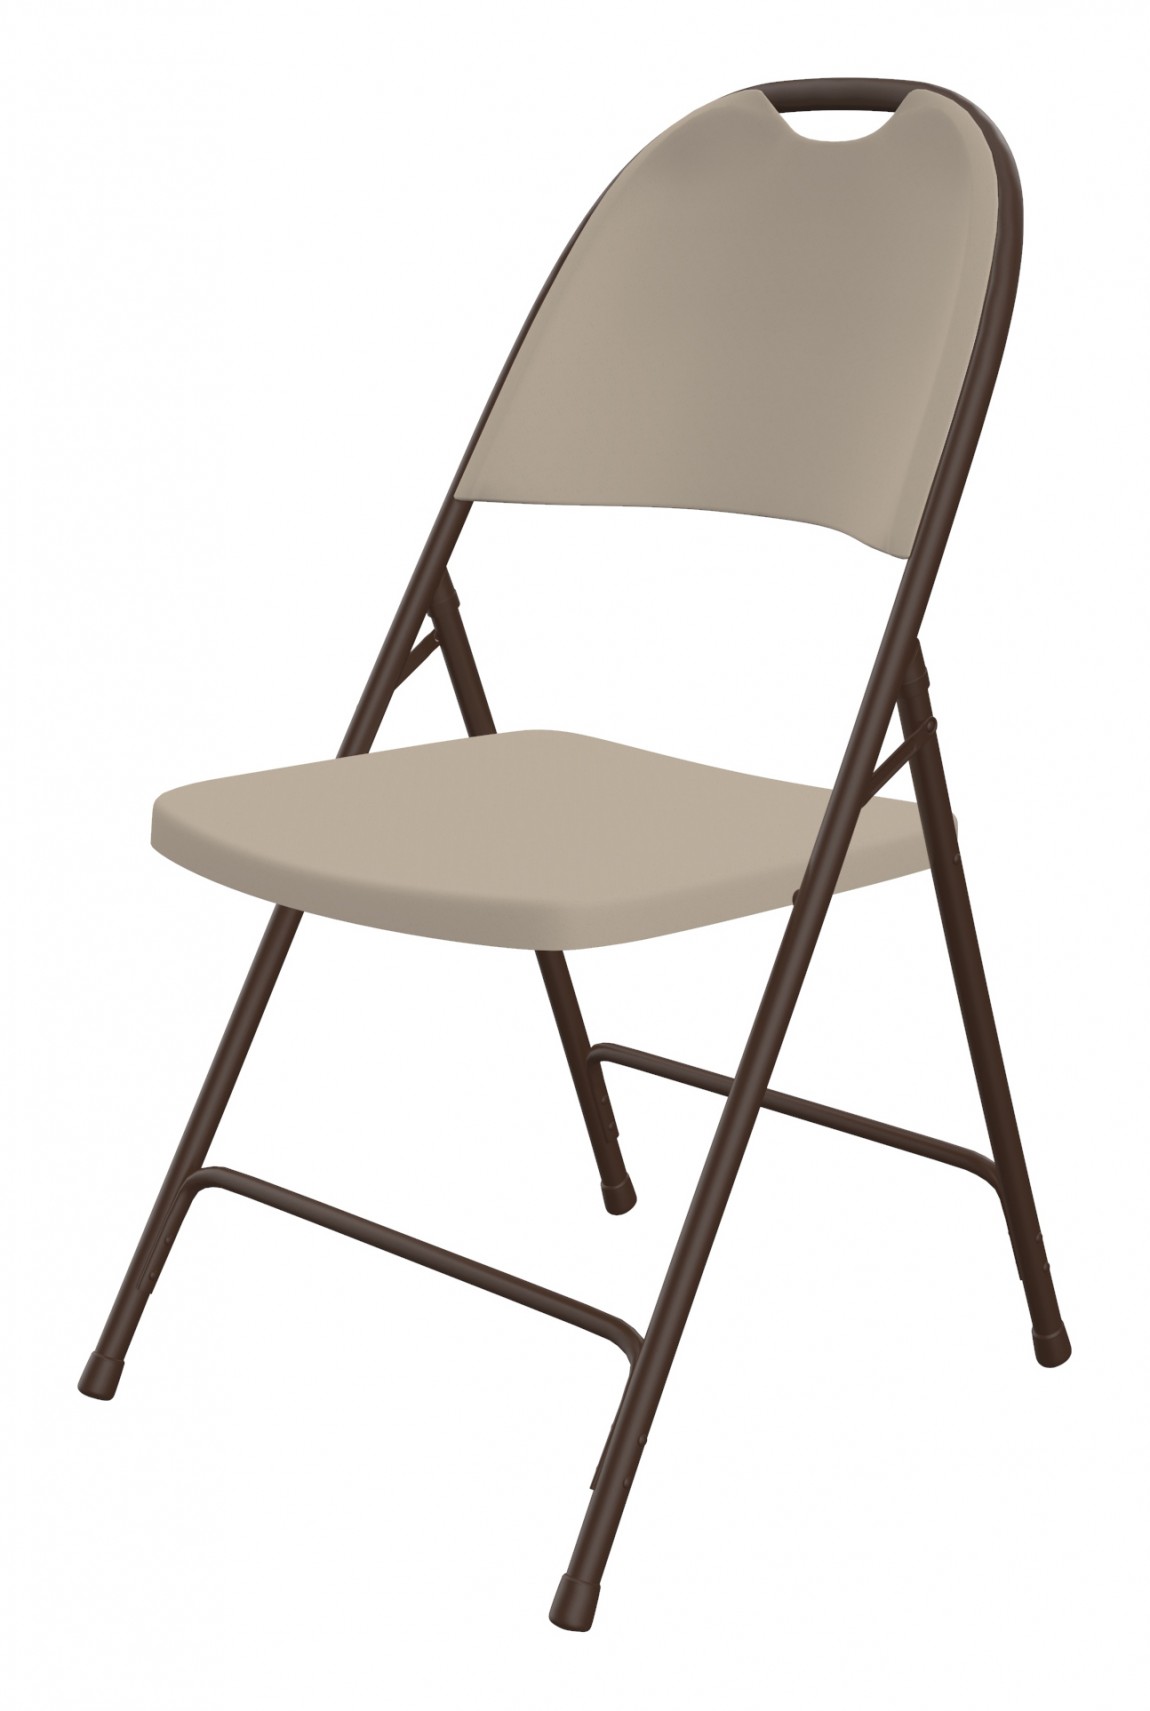 Folding Chair - 4 Pack